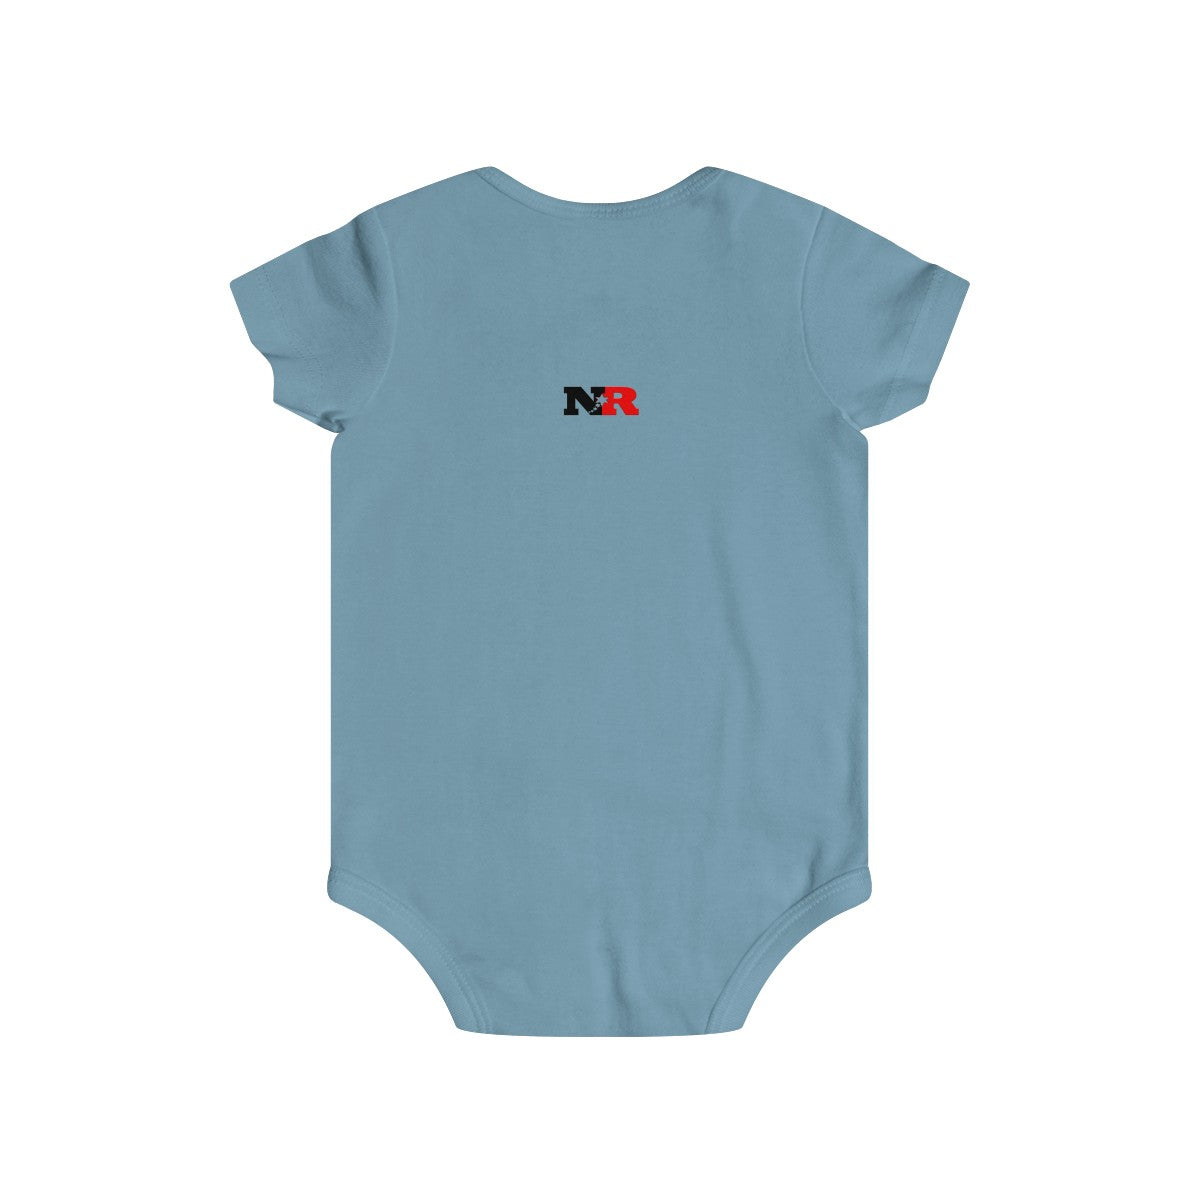 Infant Rip Snap Tee - 6 Points 5 Stars (White)